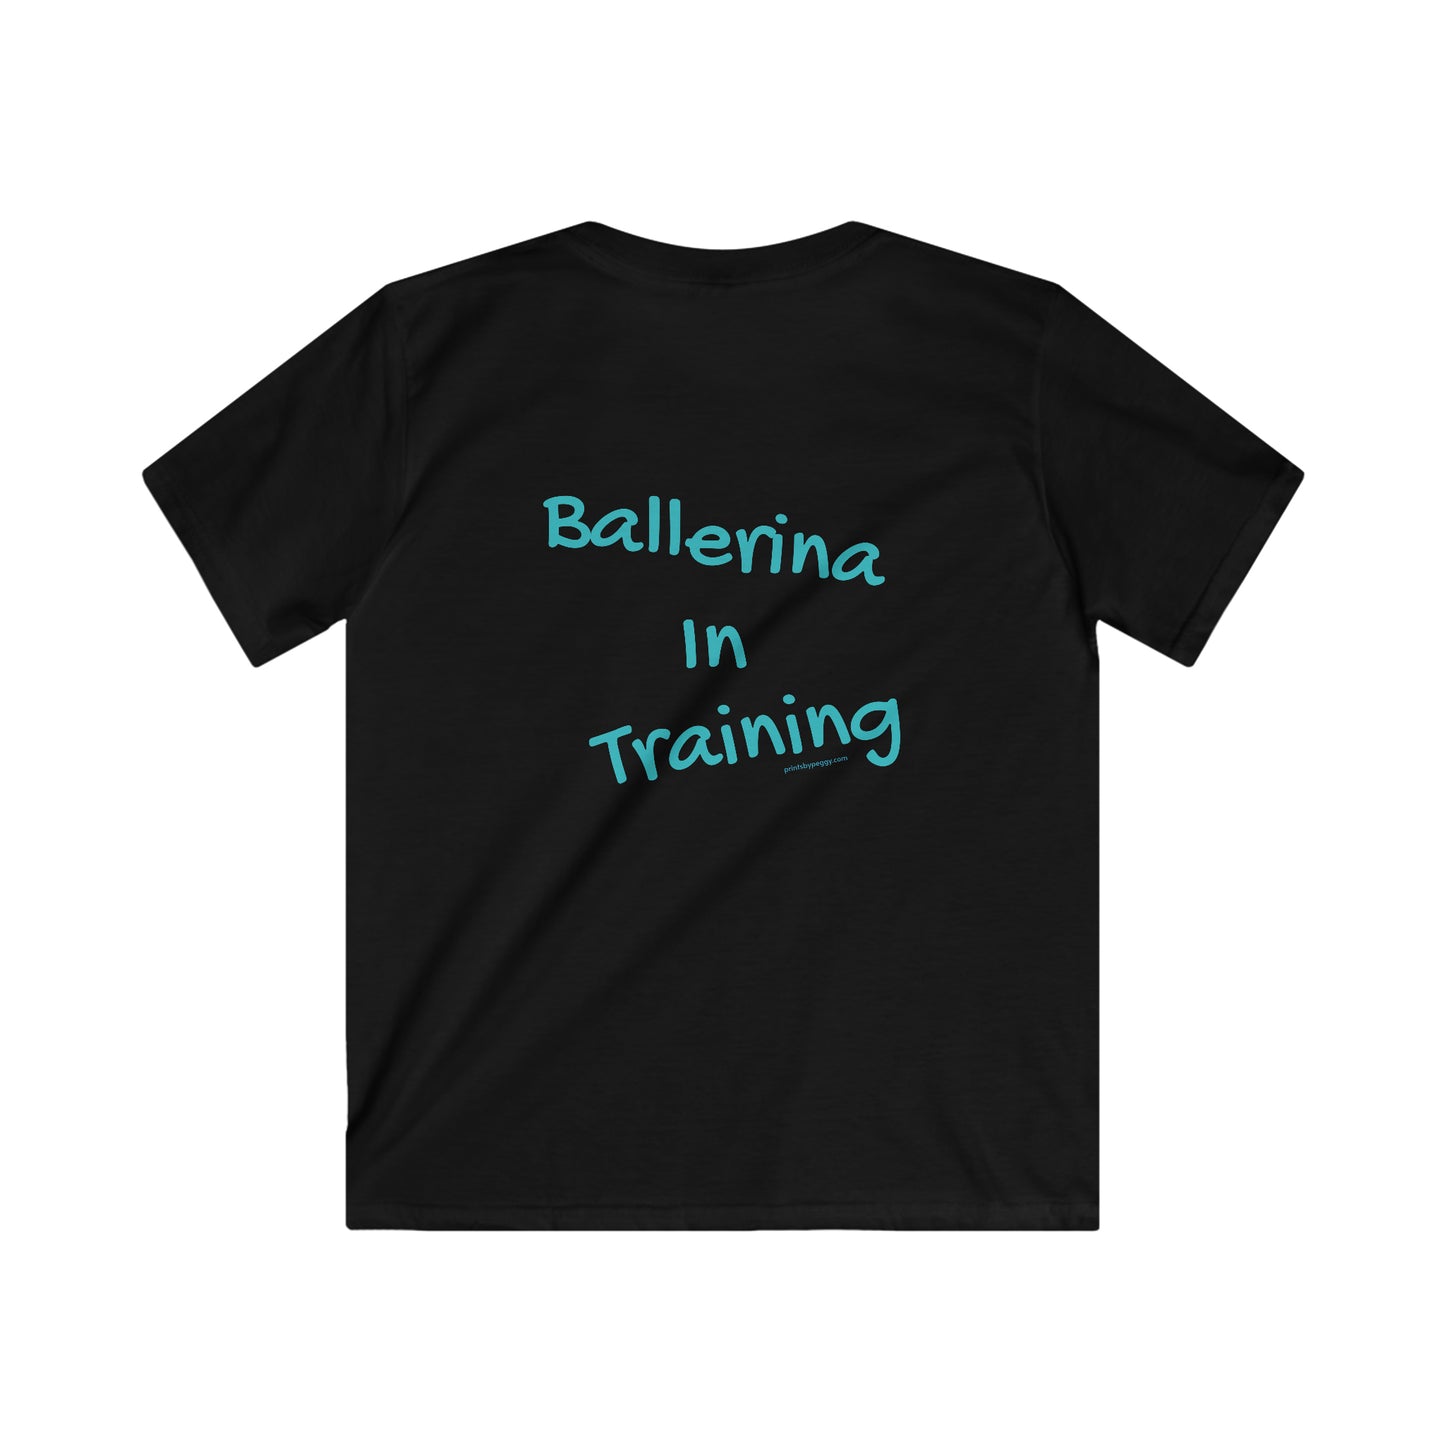 Back view of a black tee shirt that says Ballerina in Training in blue letters